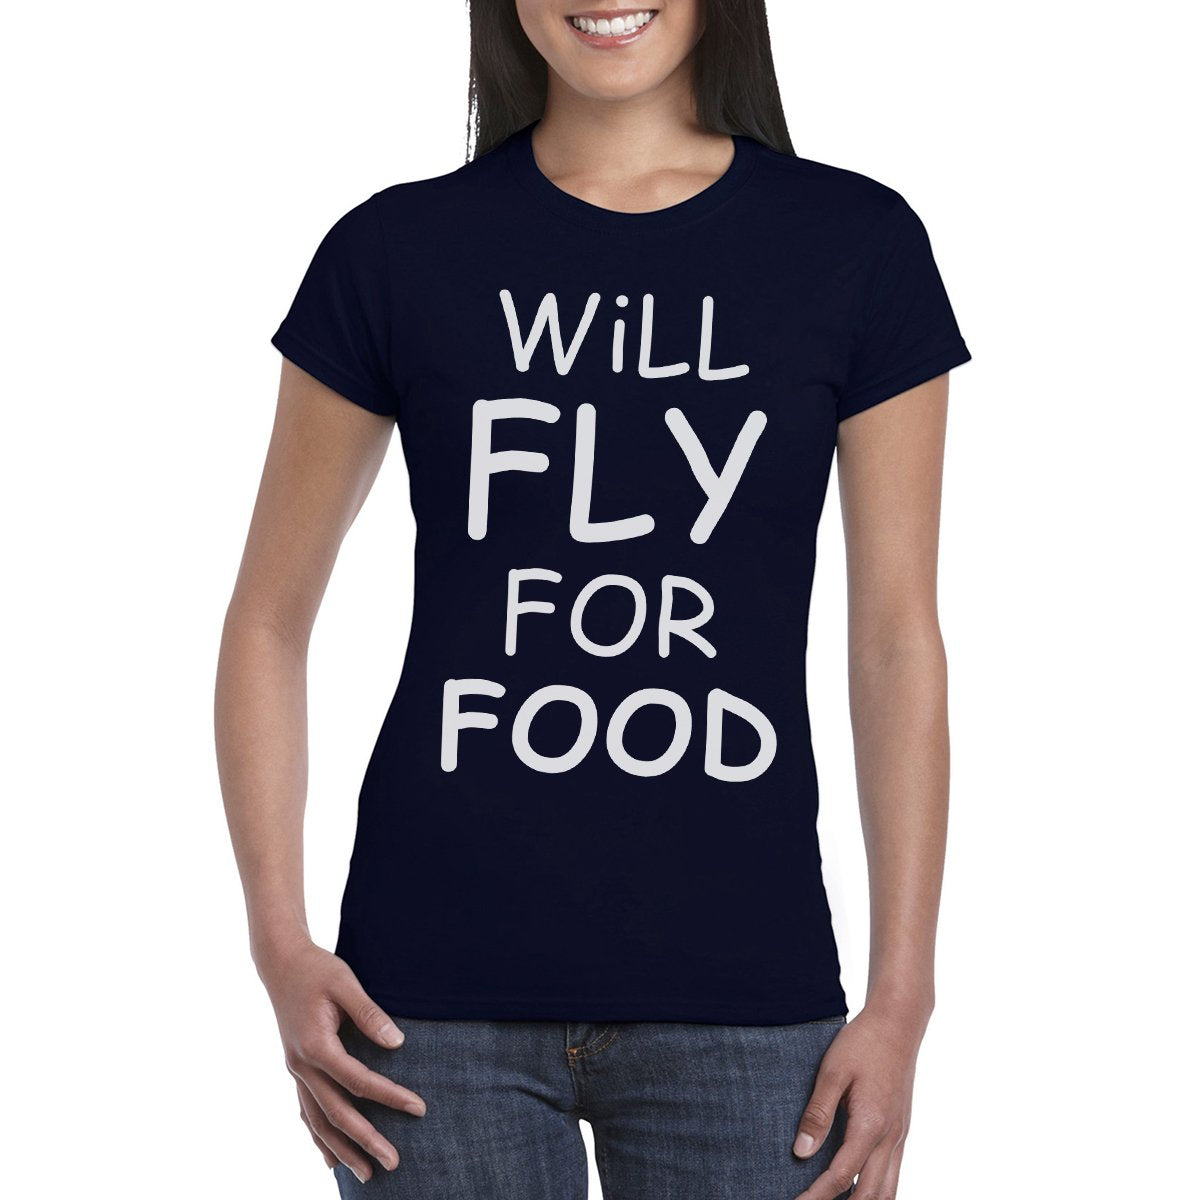 WILL FLY FOR FOOD Women's Semi-Fitted T-Shirt